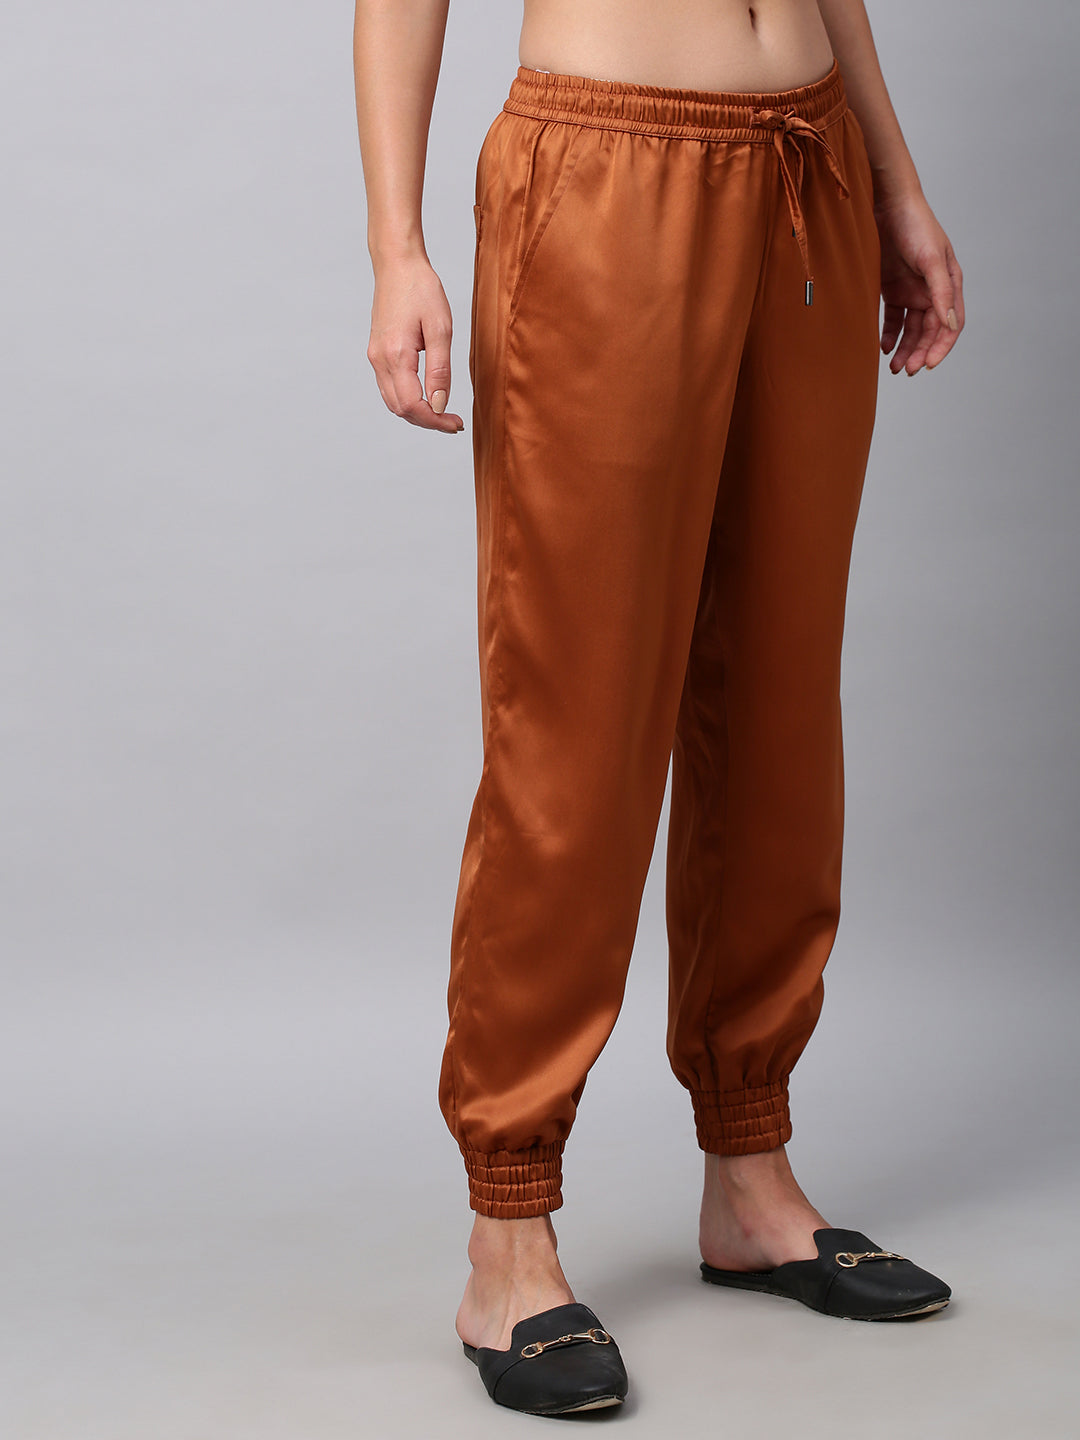 Pull On Elasticated Satin Evening Joggers